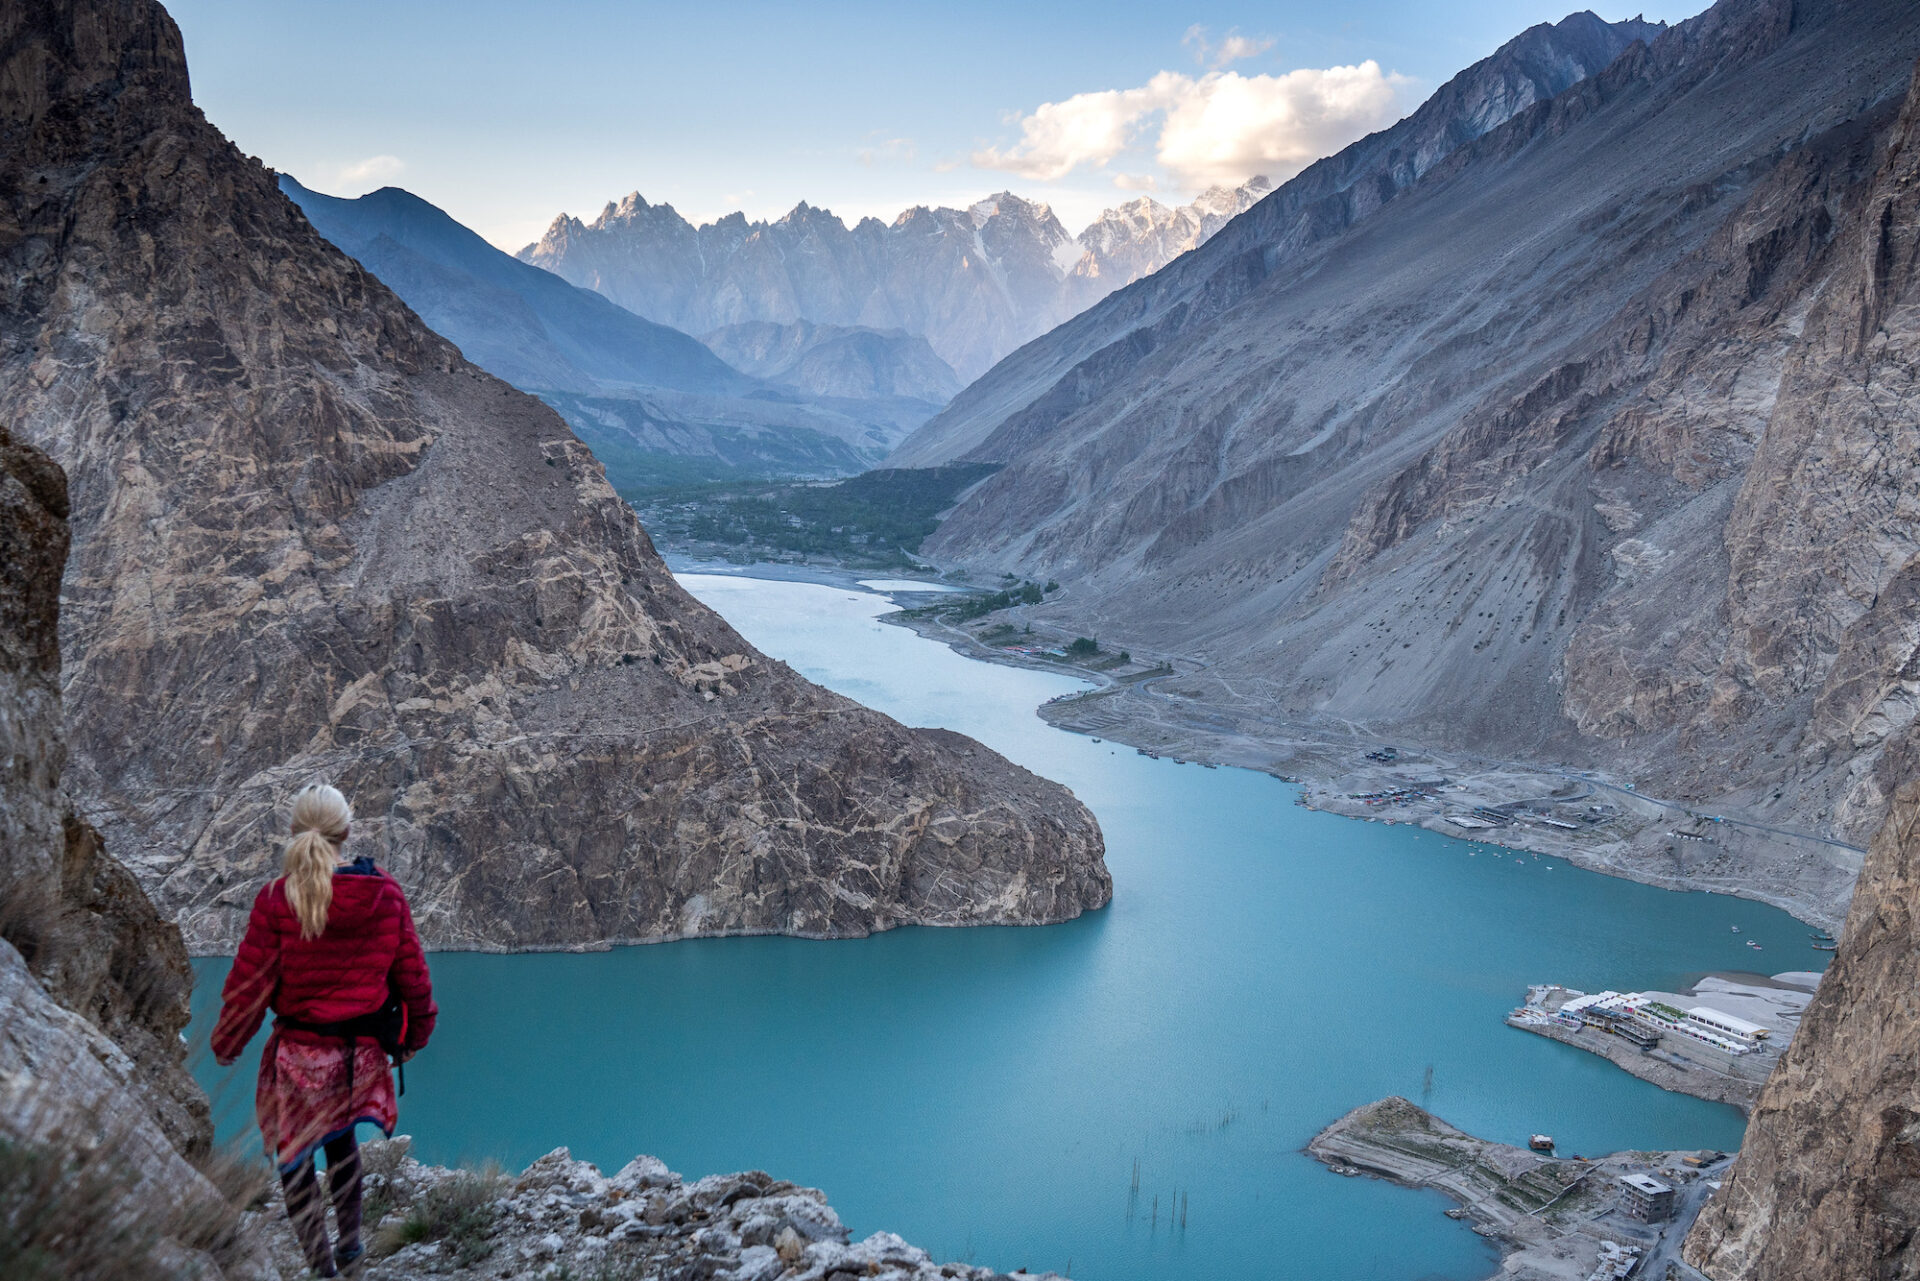 Hunza Valley Spring Blossom Tour - 10 days